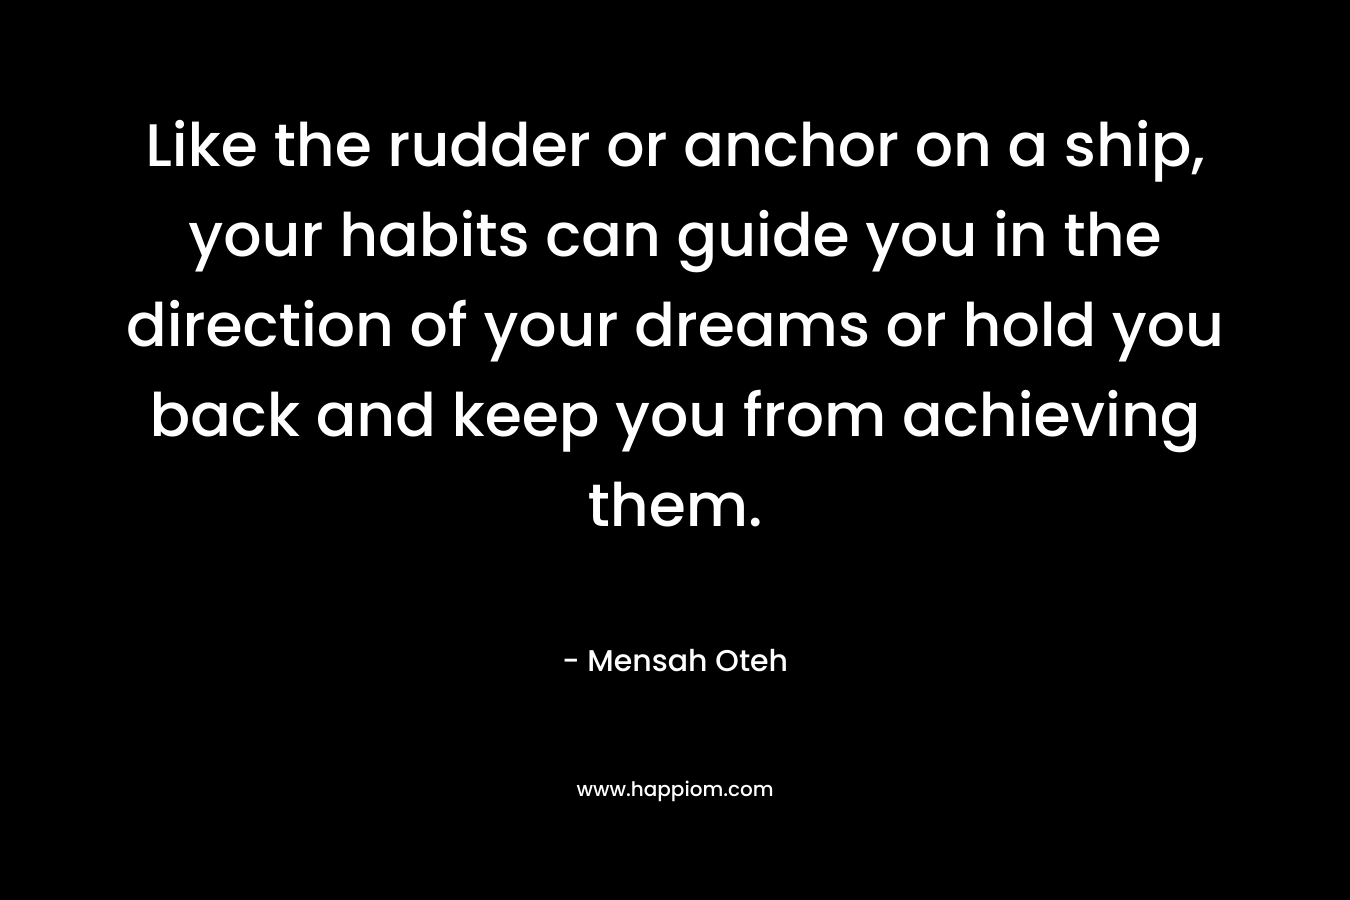 Like the rudder or anchor on a ship, your habits can guide you in the direction of your dreams or hold you back and keep you from achieving them.